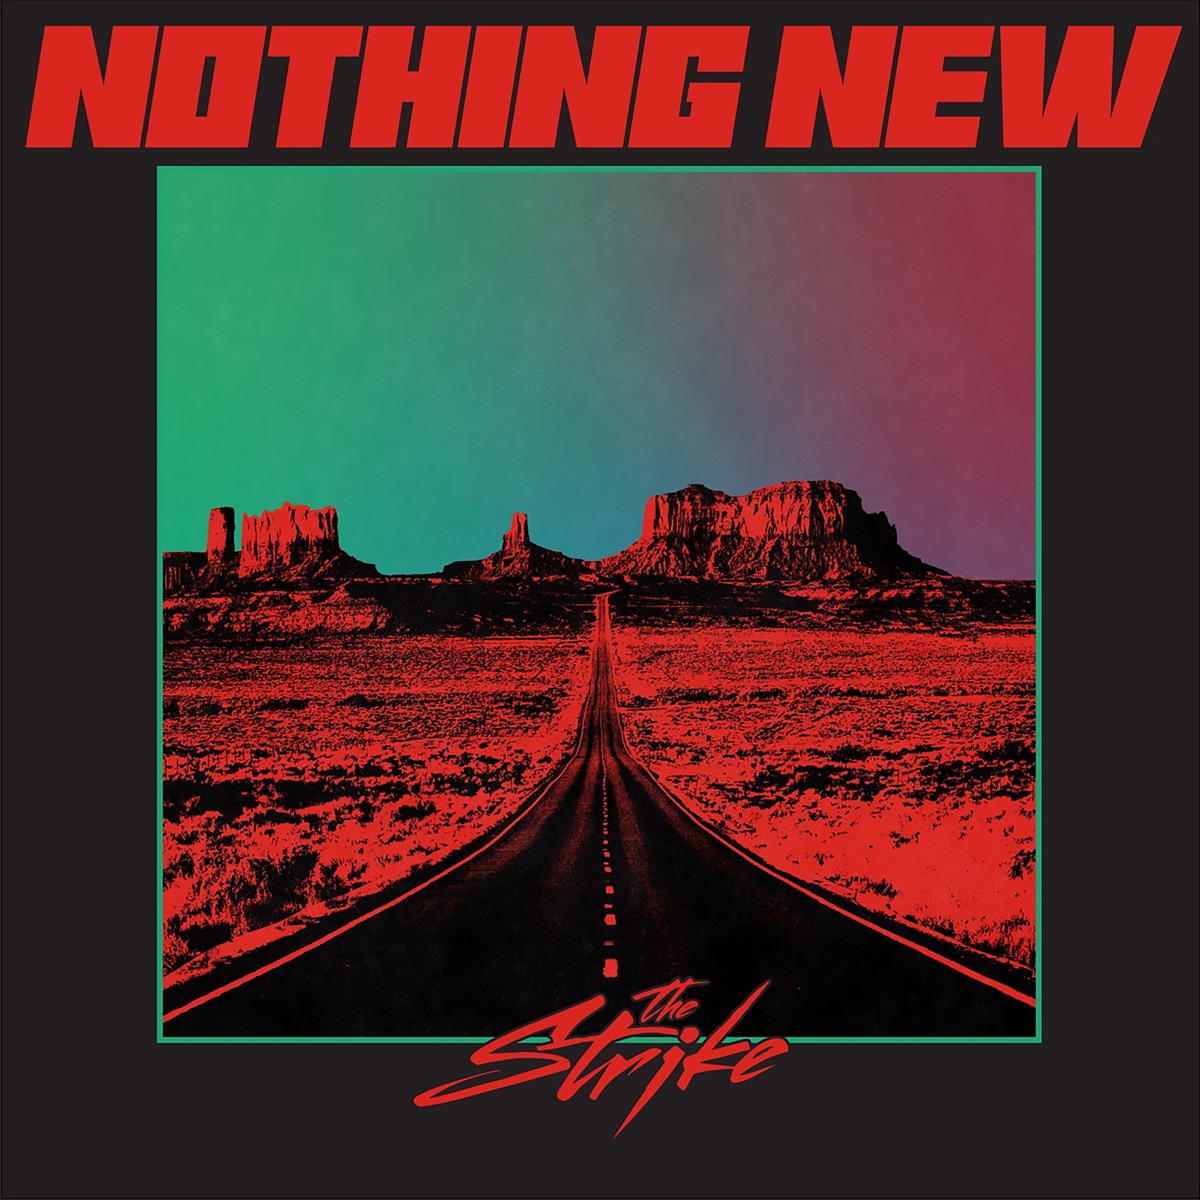 ‎Nothing New - Single - Album by The Strike - Apple Music